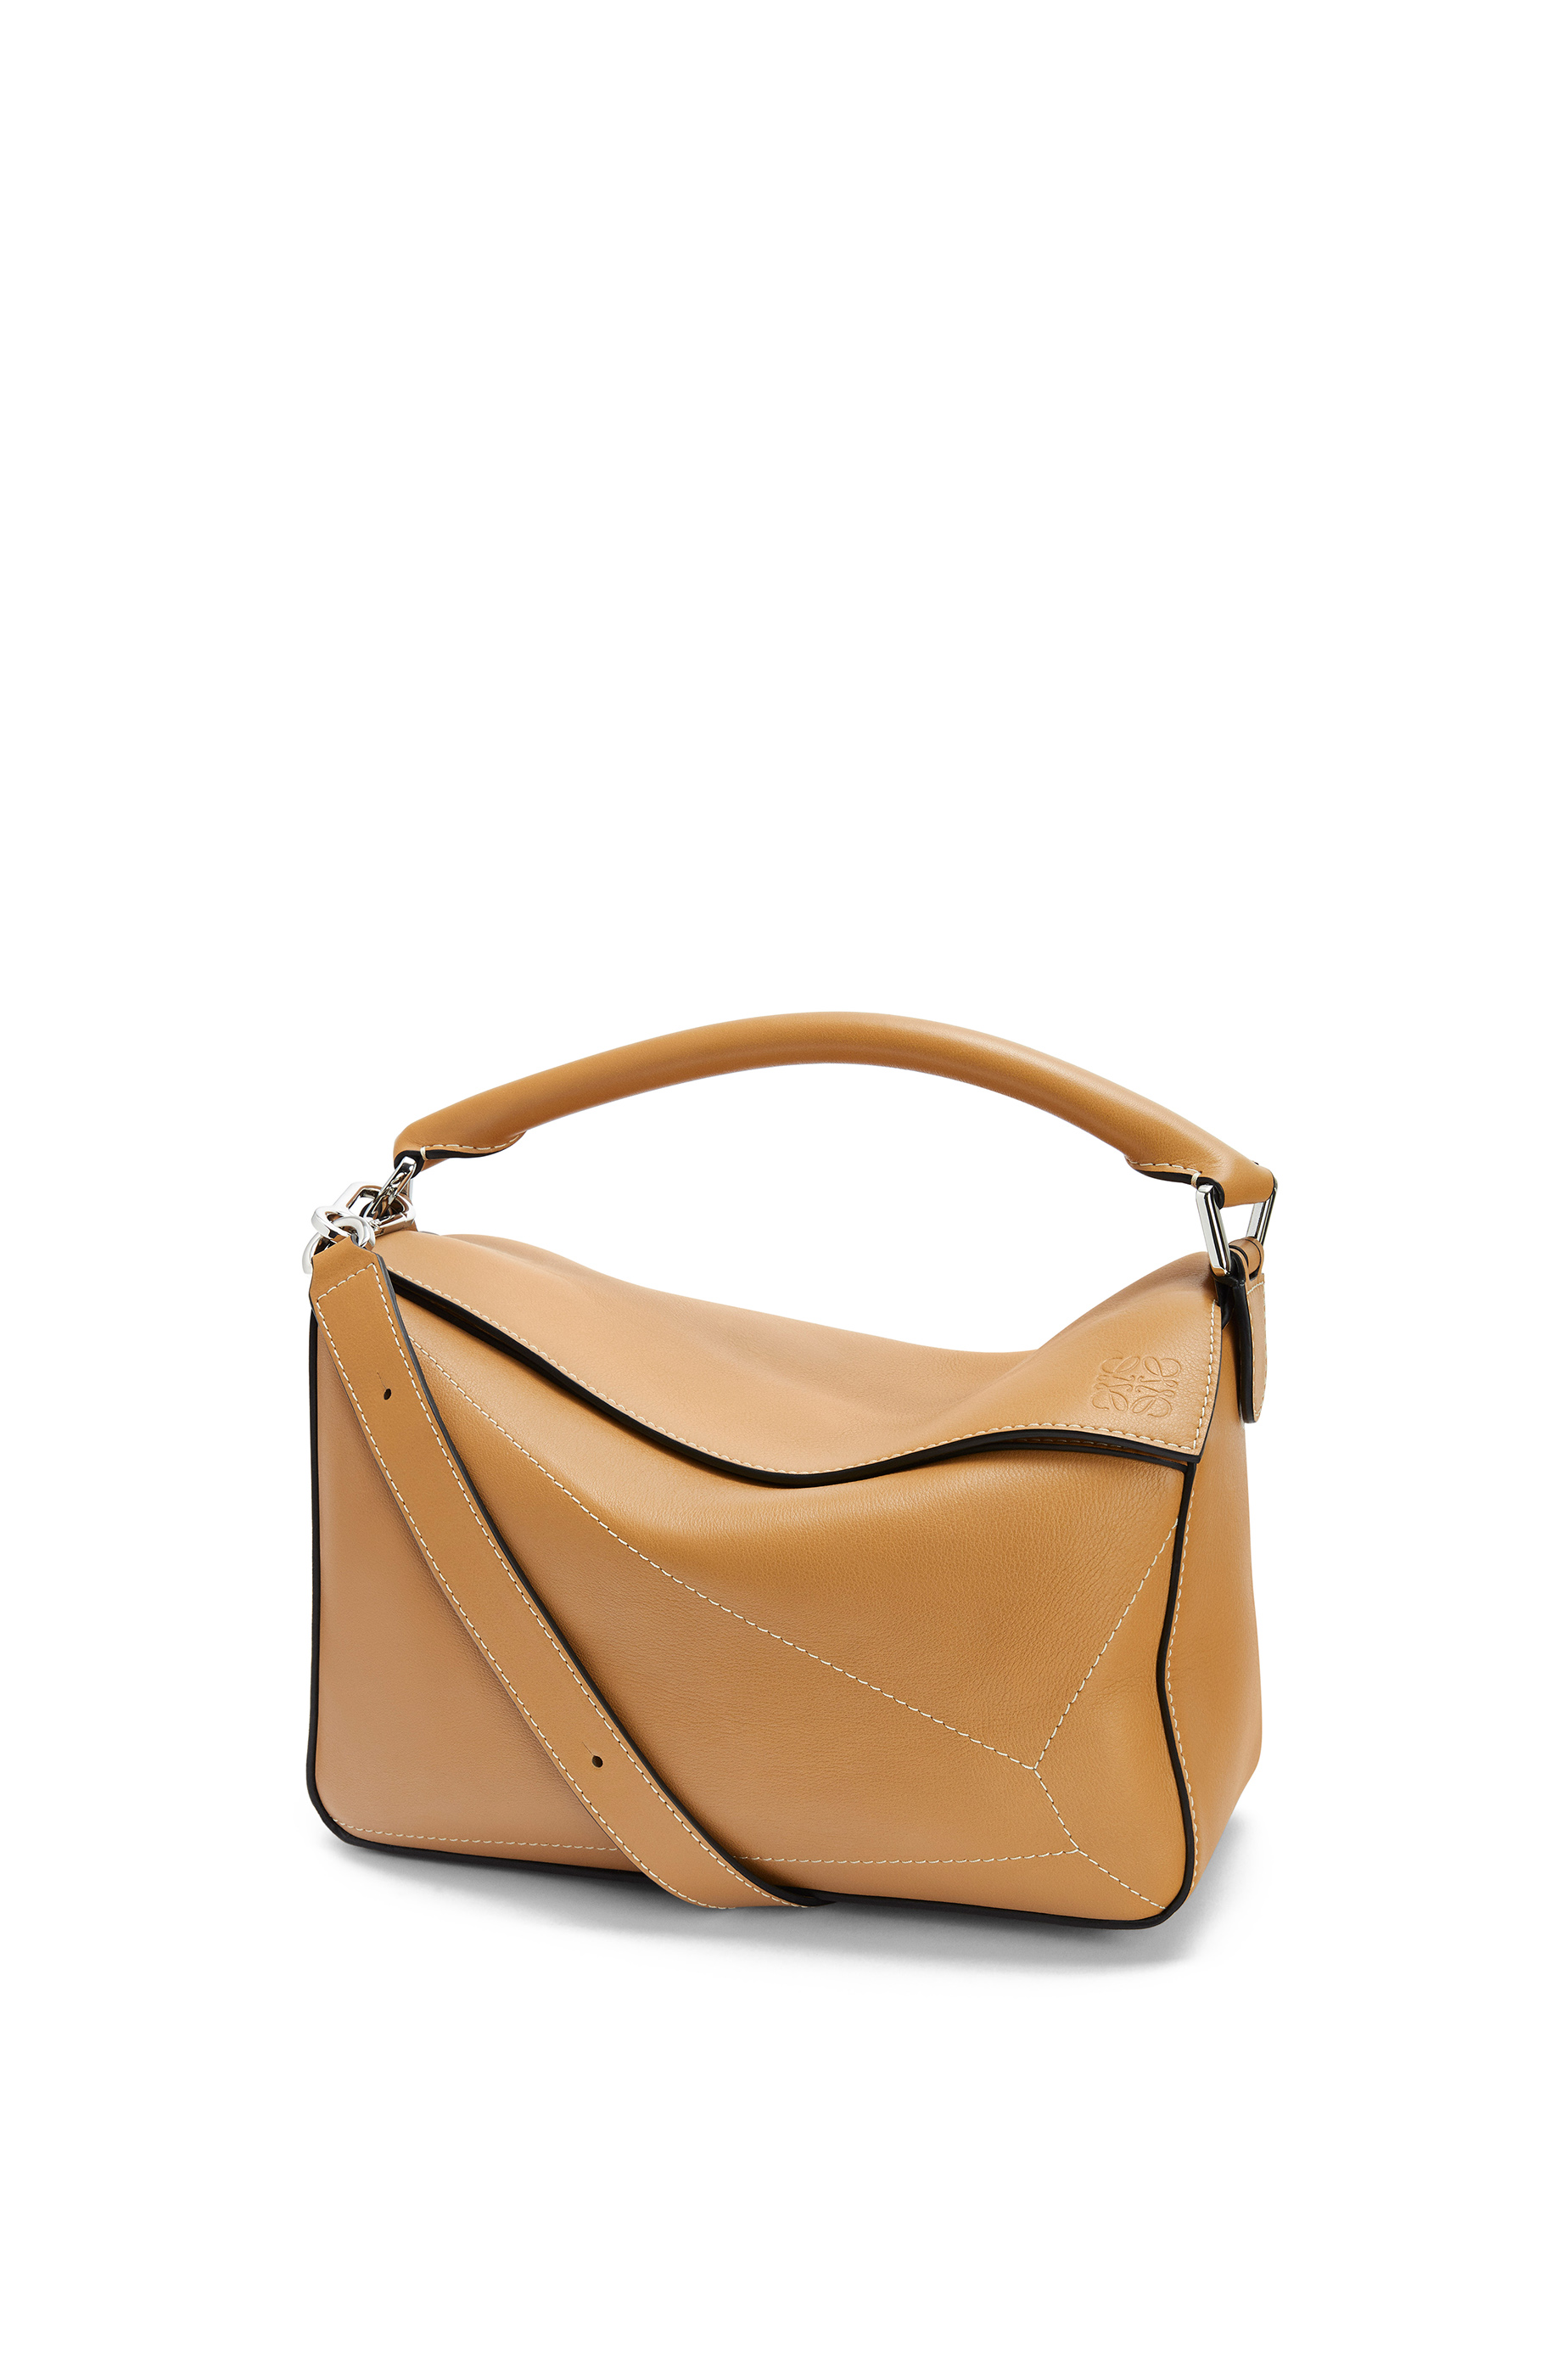 Loewe Mini Puzzle Bag Review: Take 2, Sadly Still a No - whatveewore